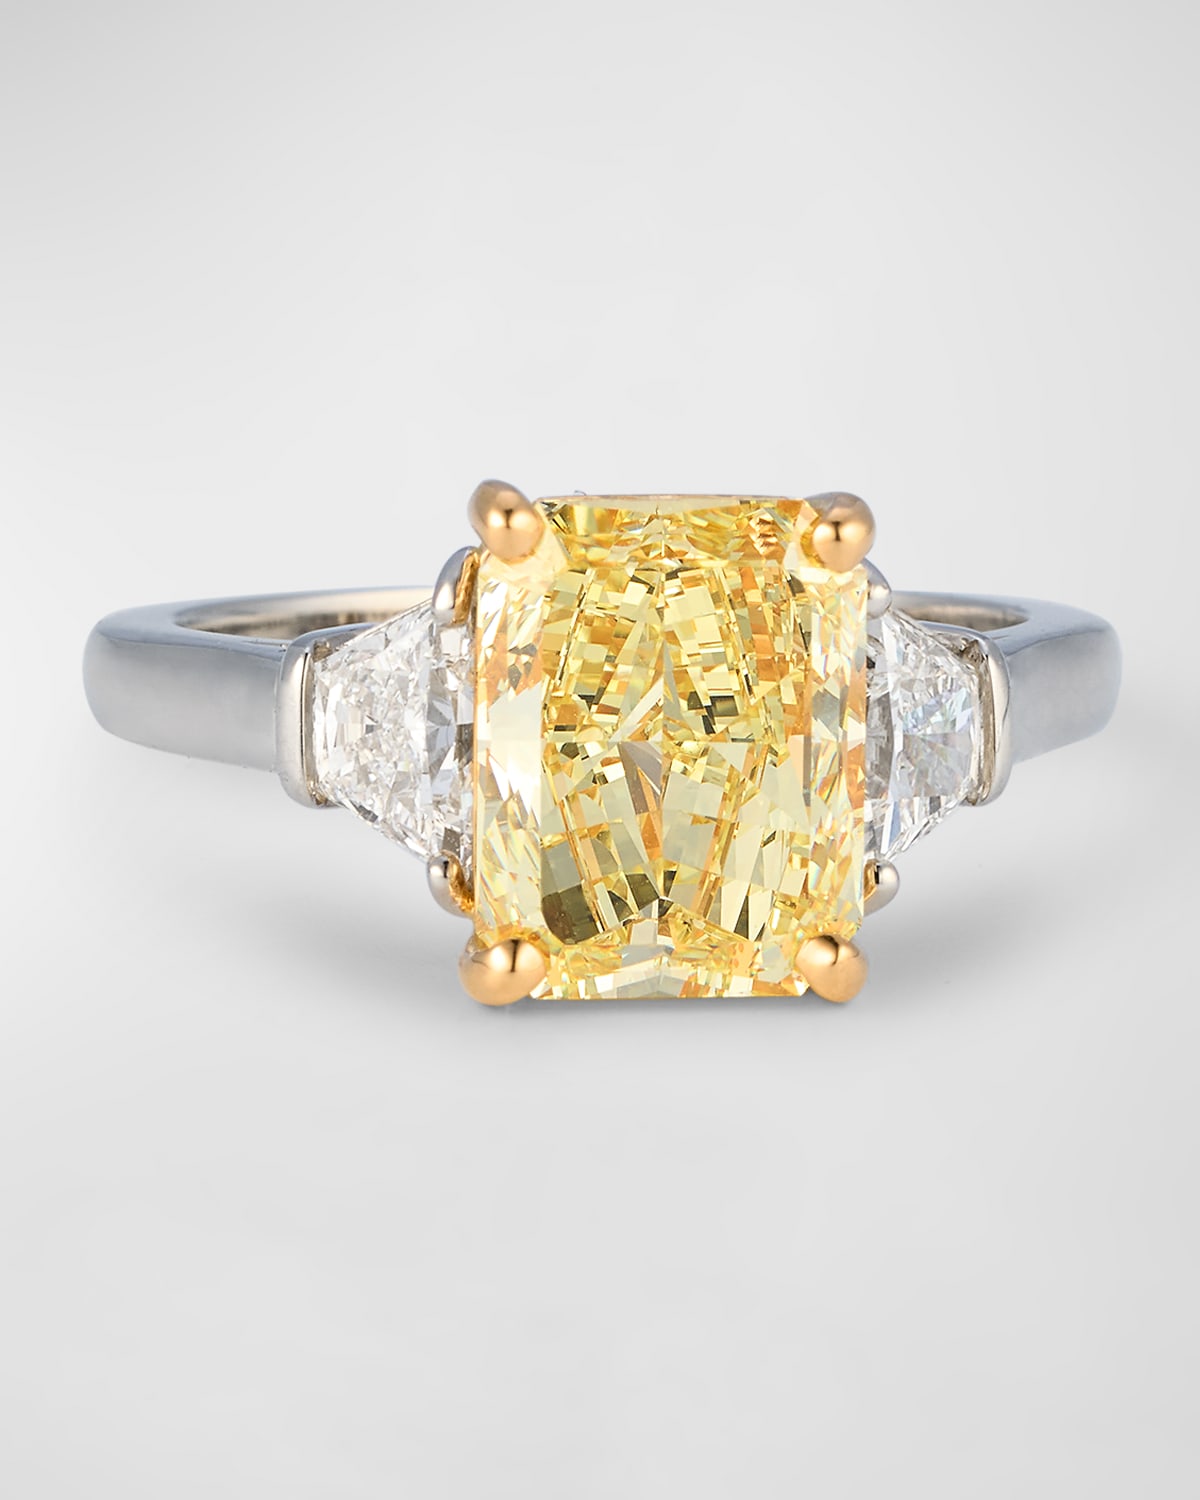 White and Fancy Yellow Diamond Ring, Size 6.5